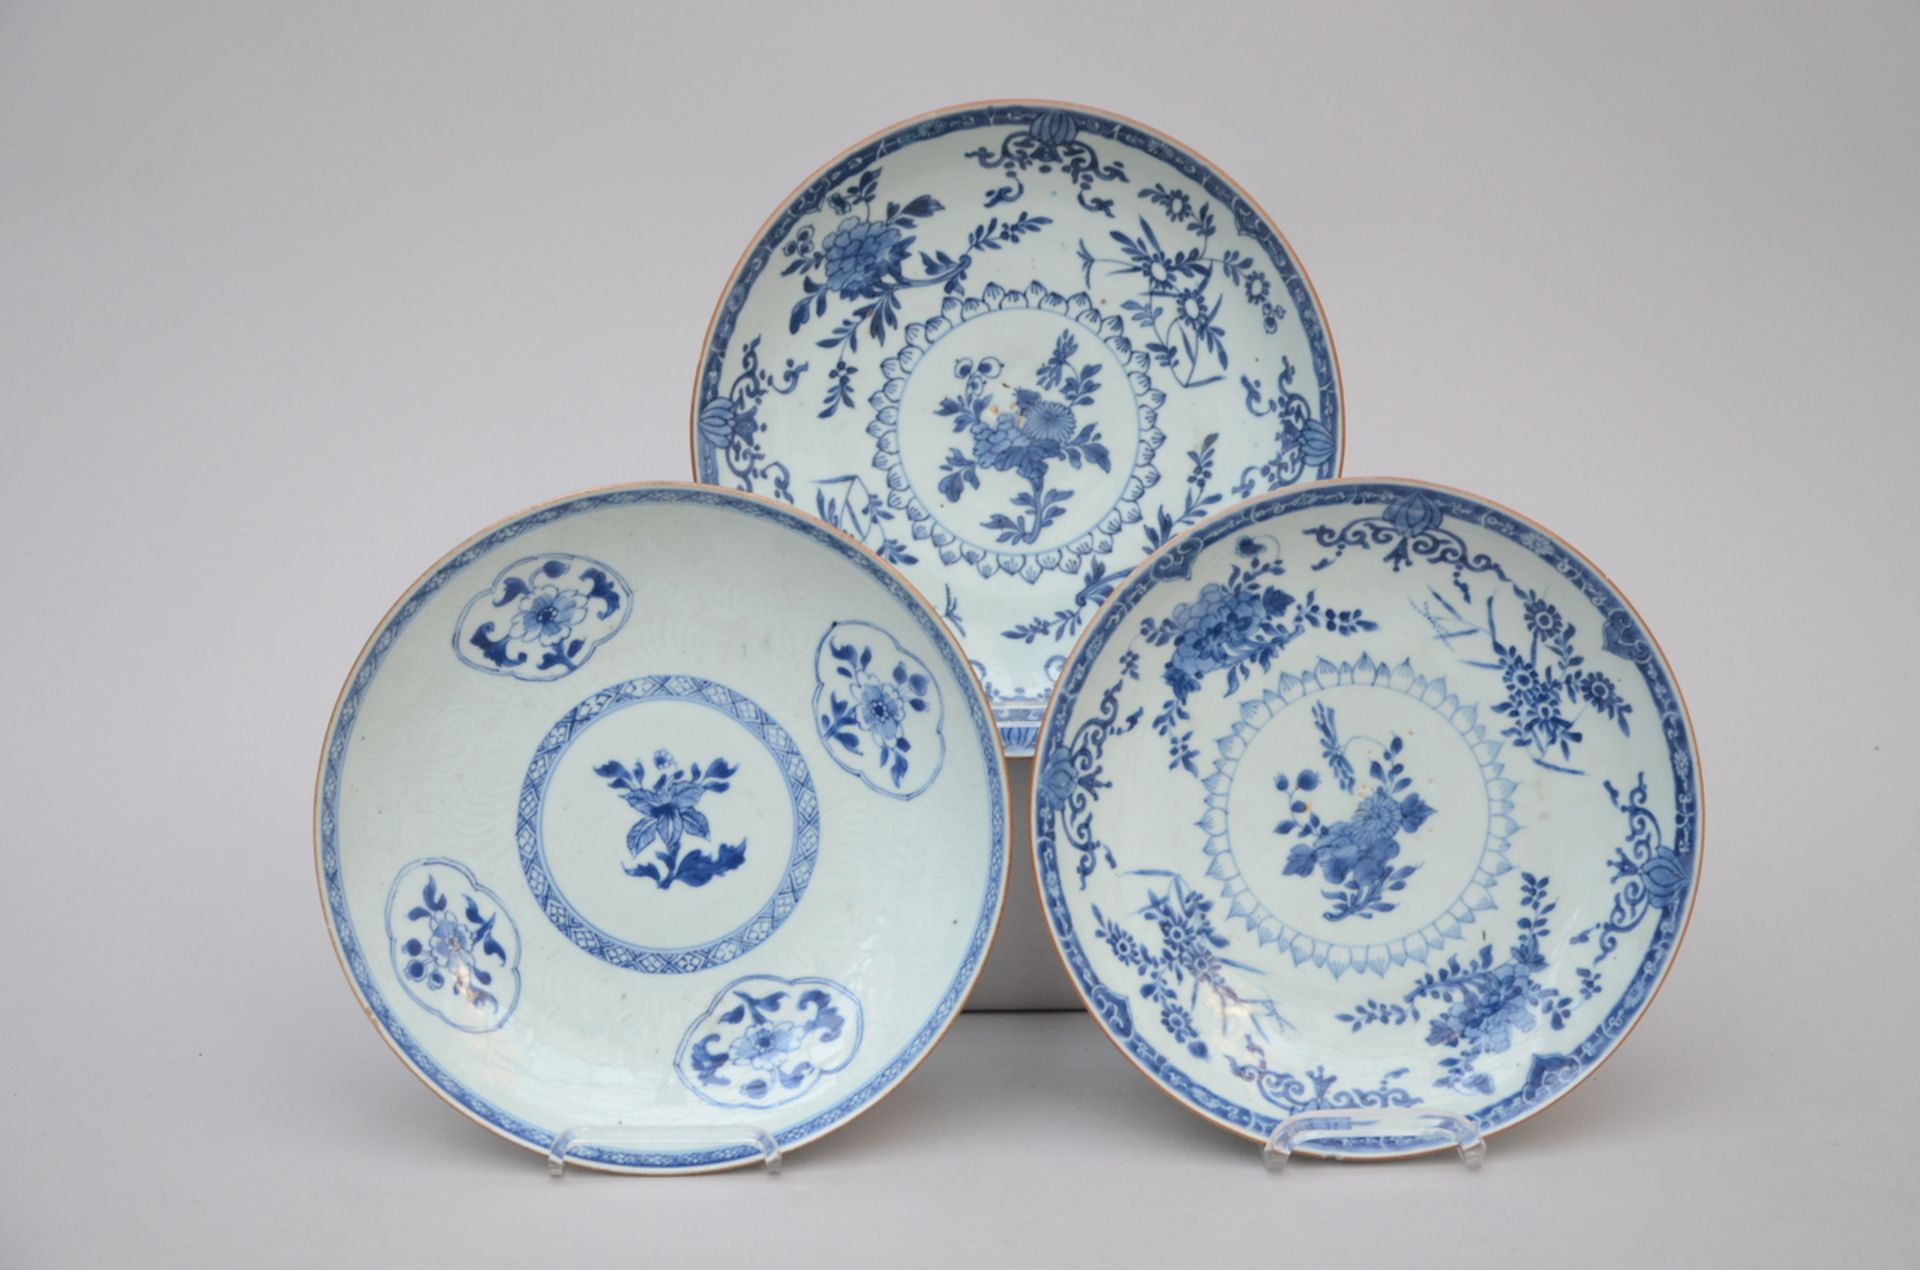 Three dishes in Chinese blue and white porcelain, 18th century (dia 28 cm)